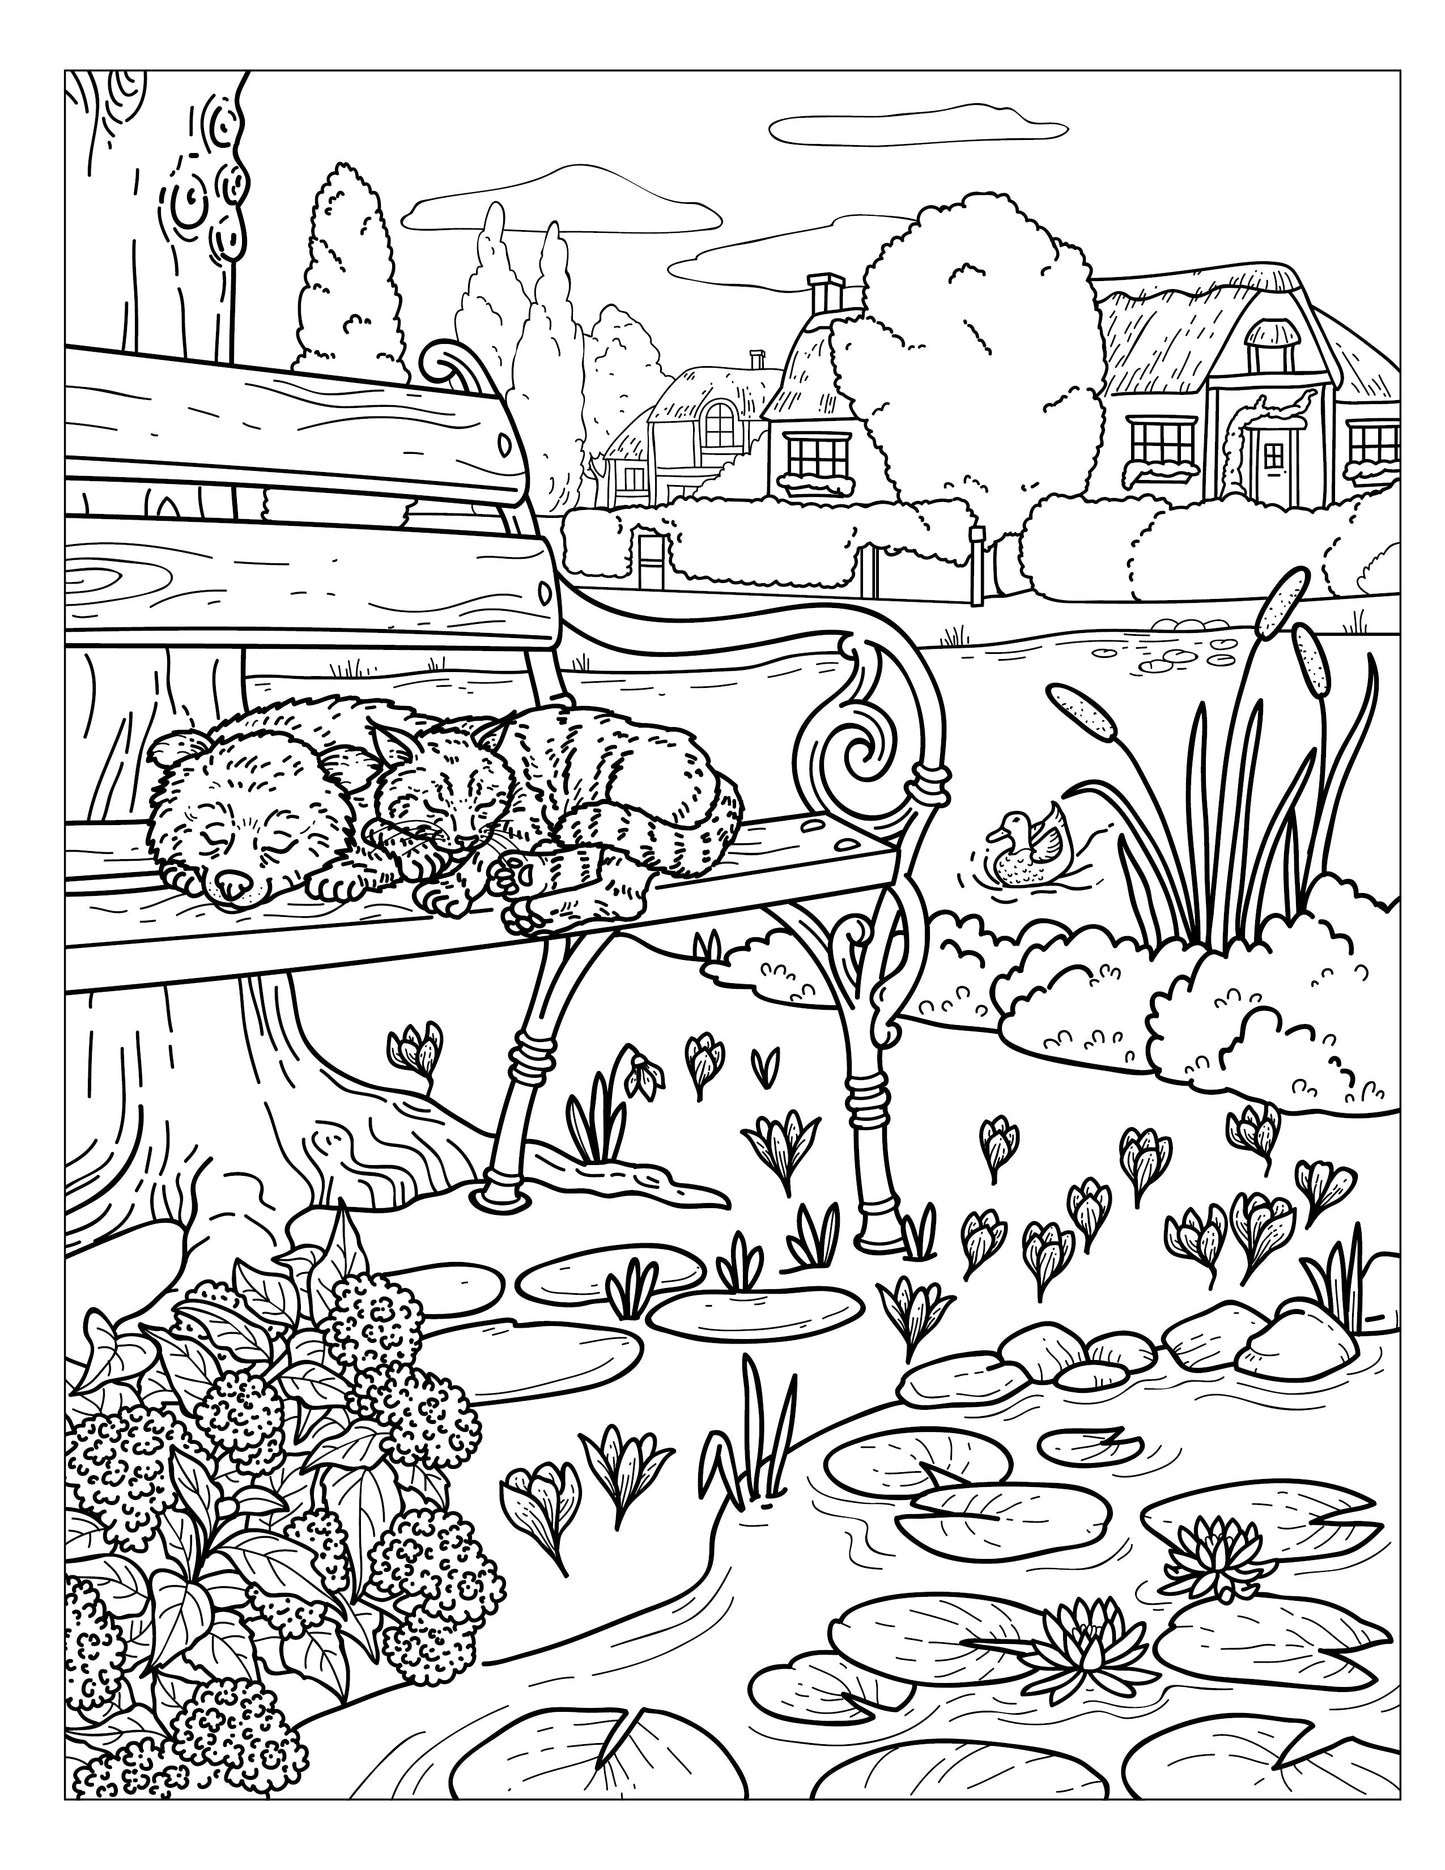 Single Coloring Book Page - Winston & Whiskers, Adventure One - A Nap by the Pond